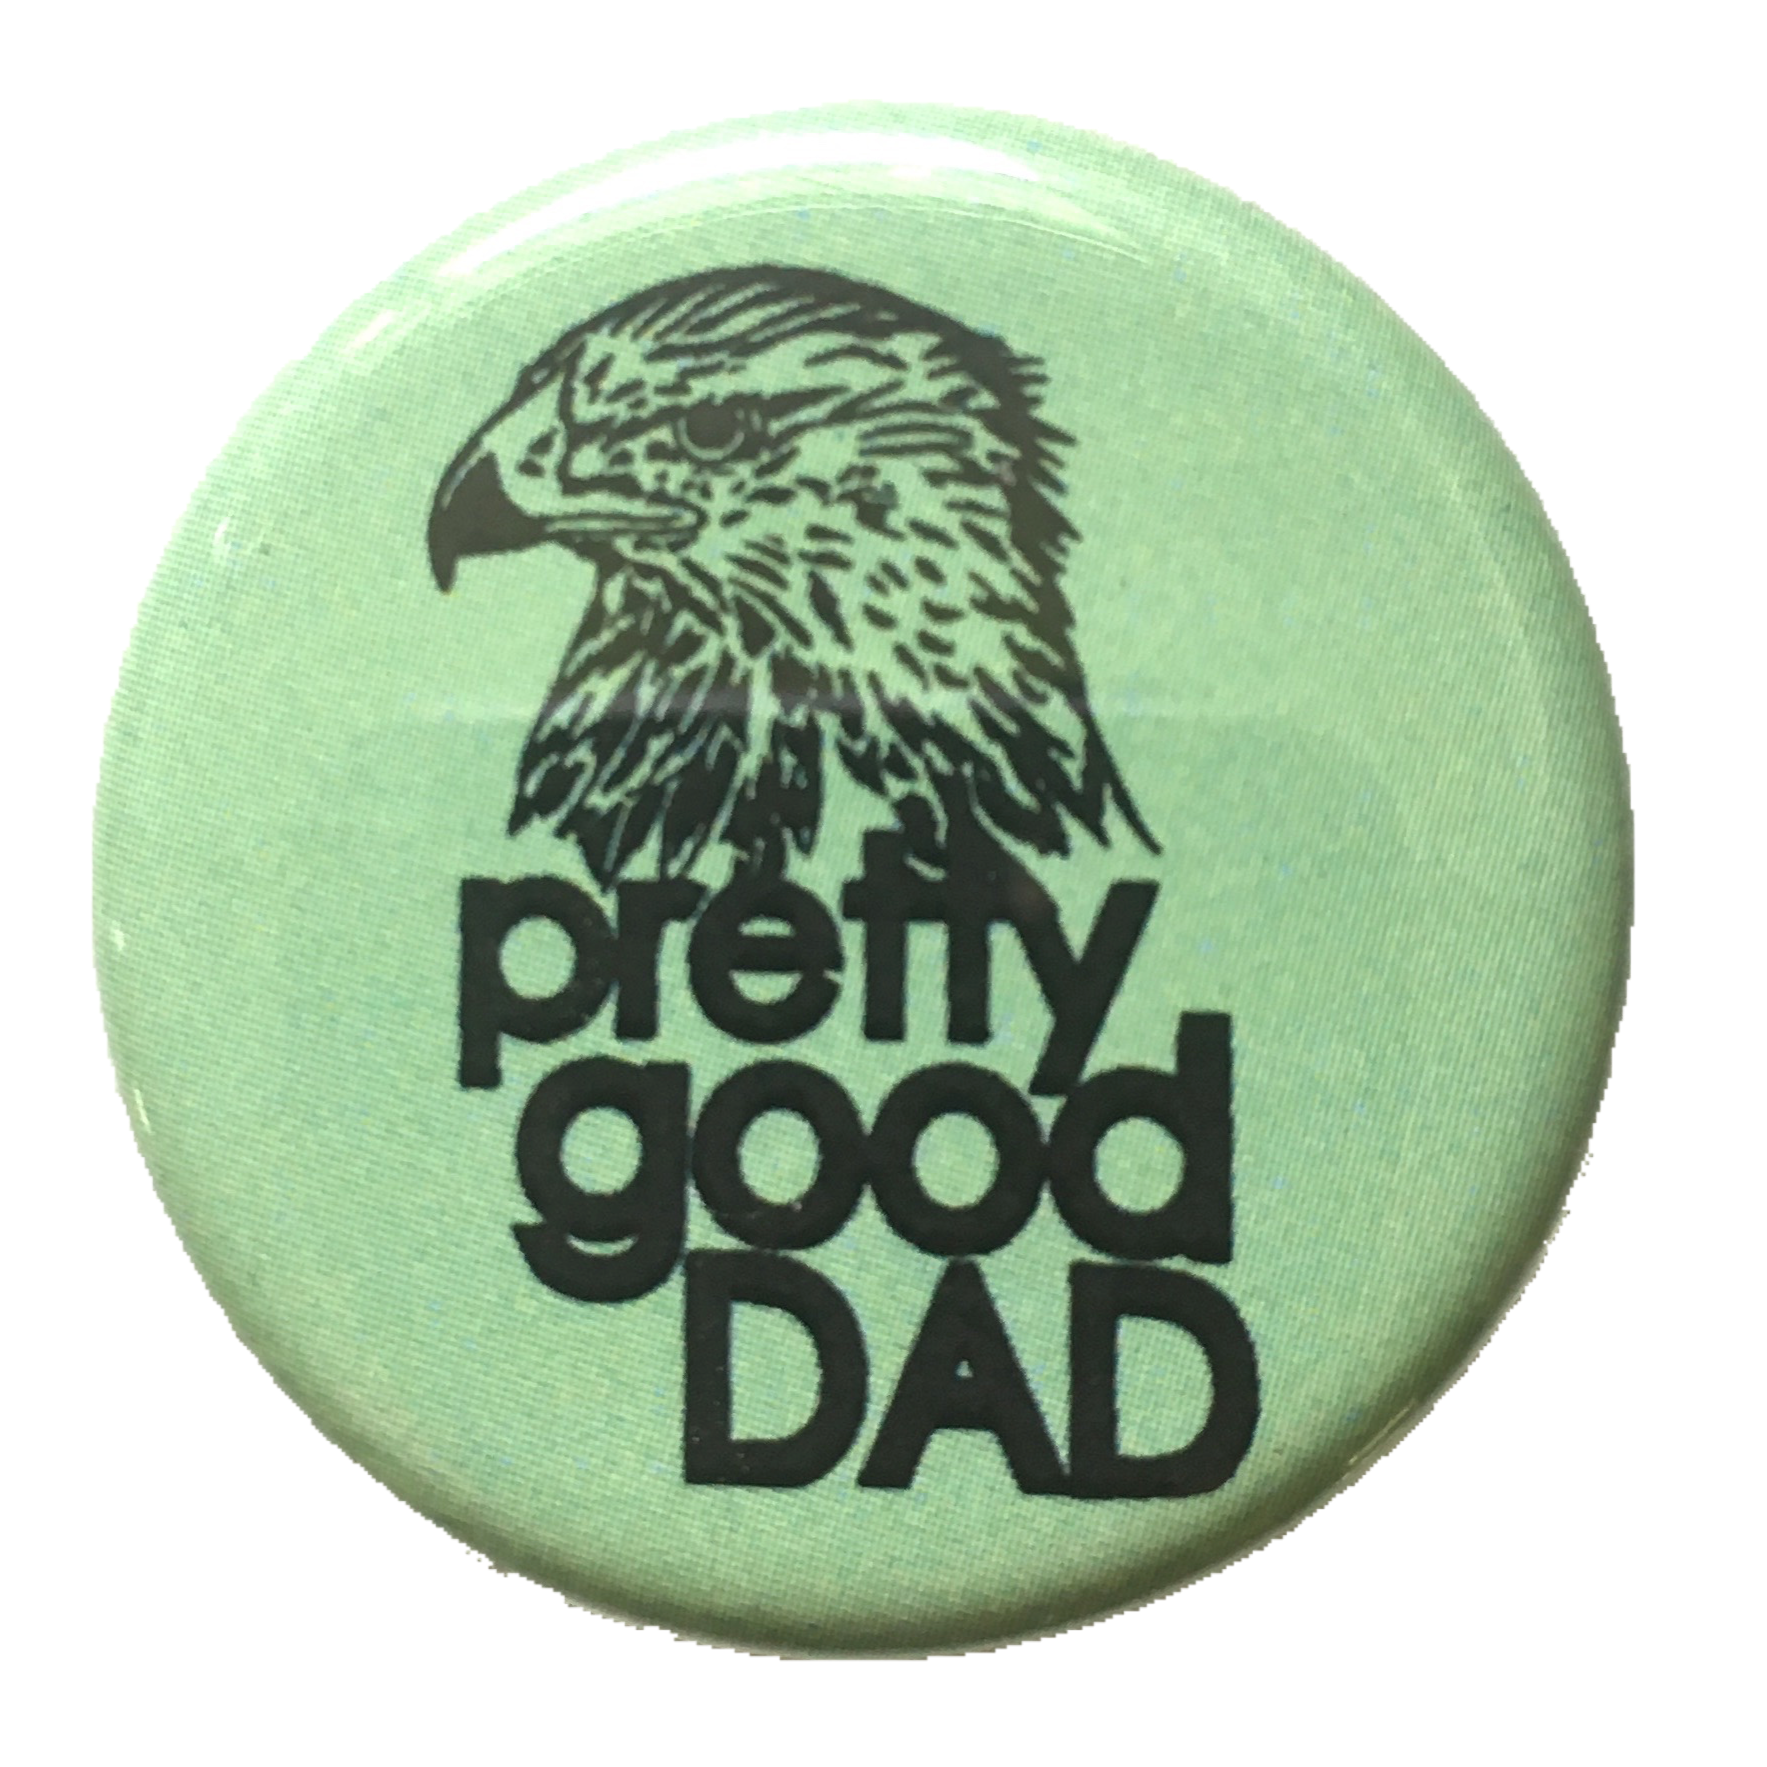 Pretty Good Dad button and magnet